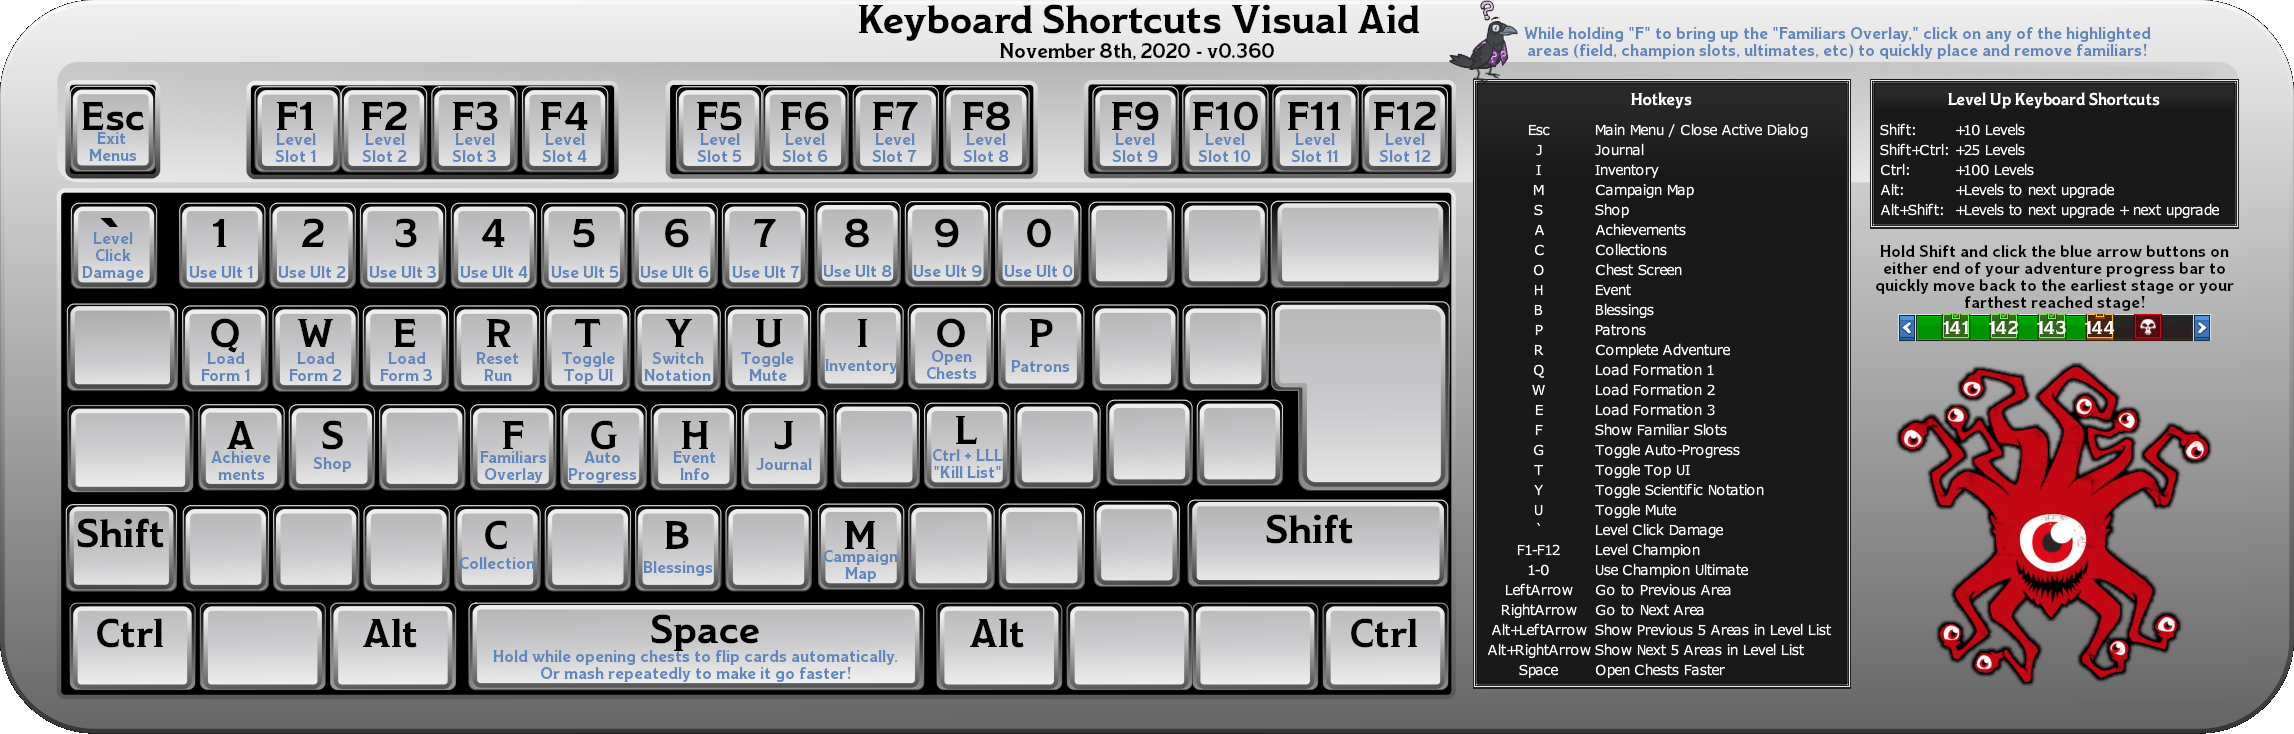 Idle Champions Keyboard Shortcuts infographic